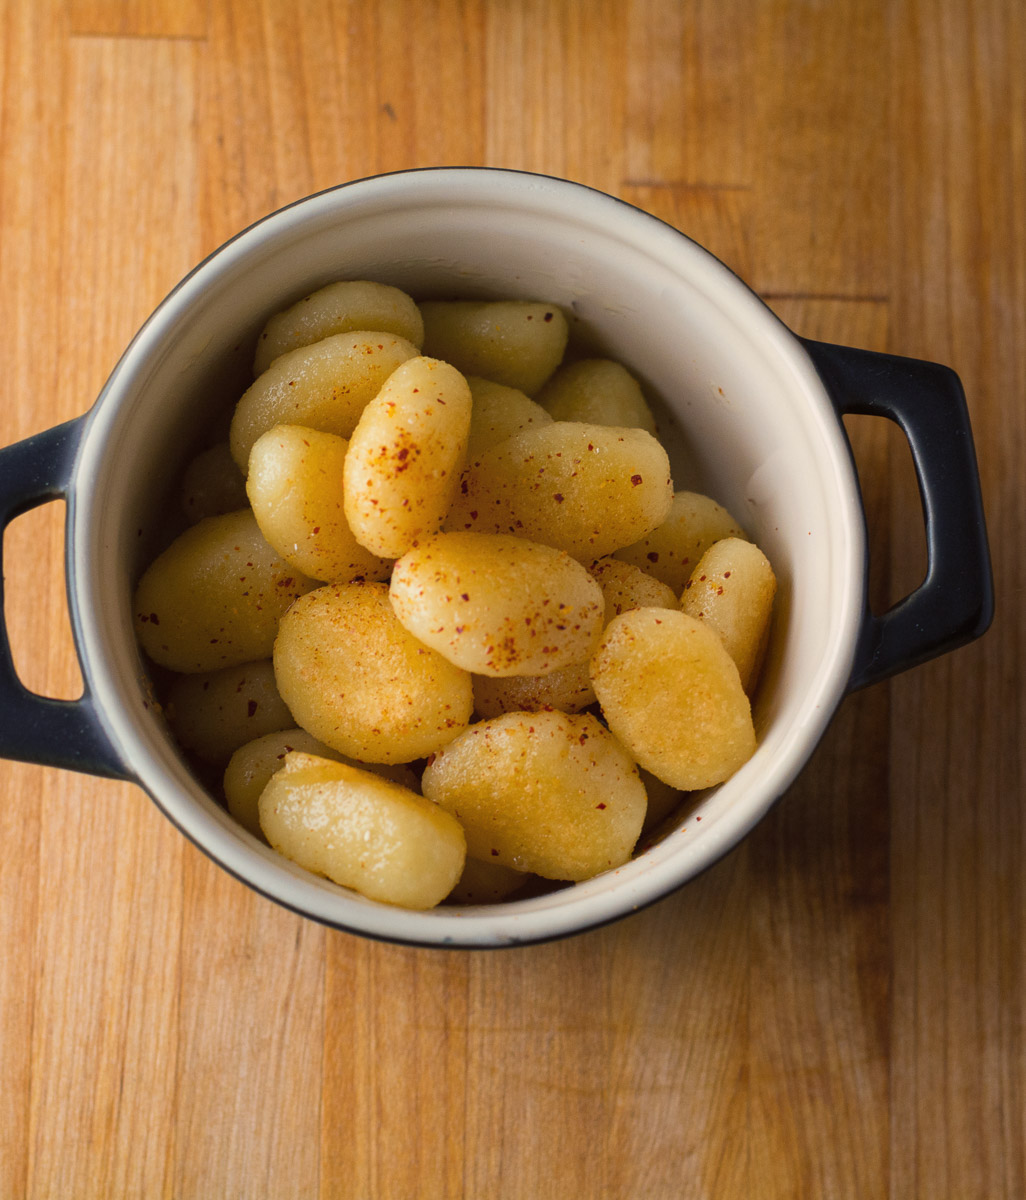 Fried gnocchi is a quick and easy side that pairs well with saucy dishes. Using store-bought gnocchi to make this a no brainer weeknight side.